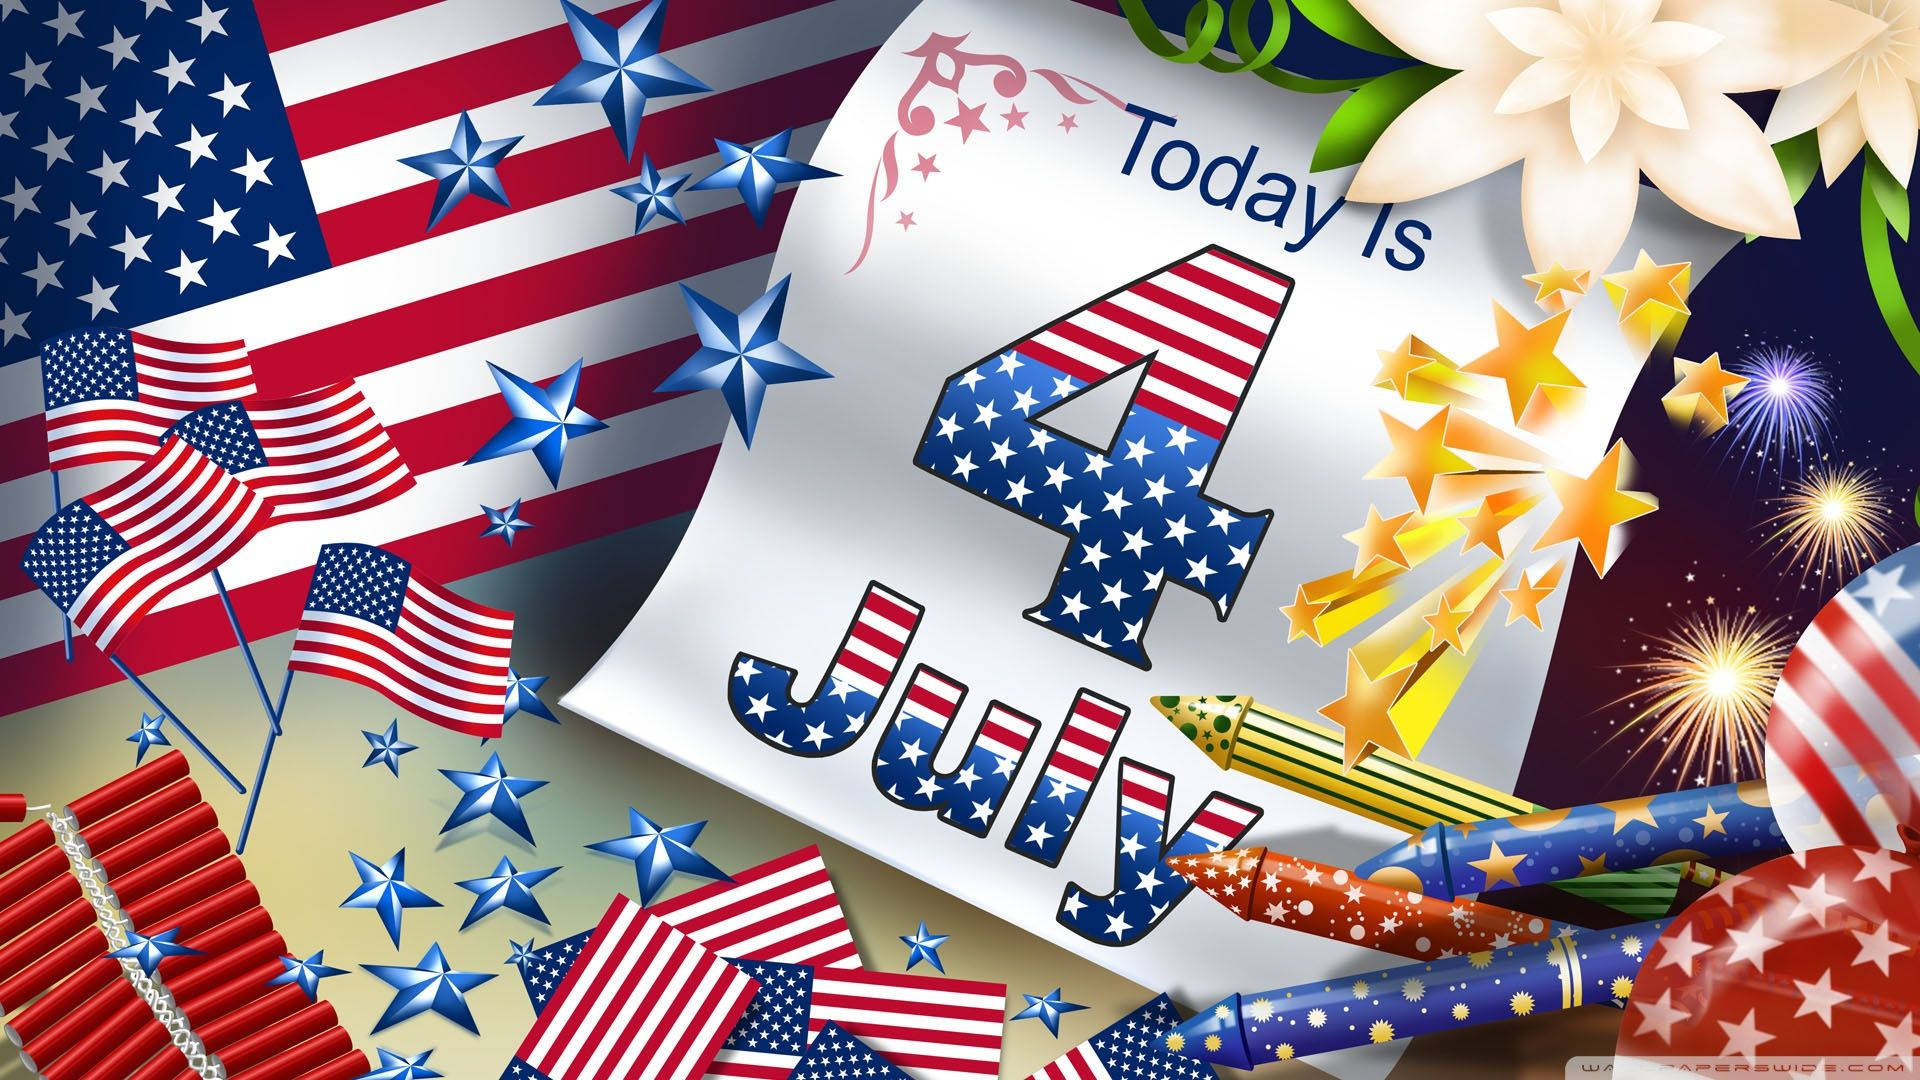 Free Independence Day Wallpaper Downloads, [100+] Independence Day  Wallpapers for FREE 